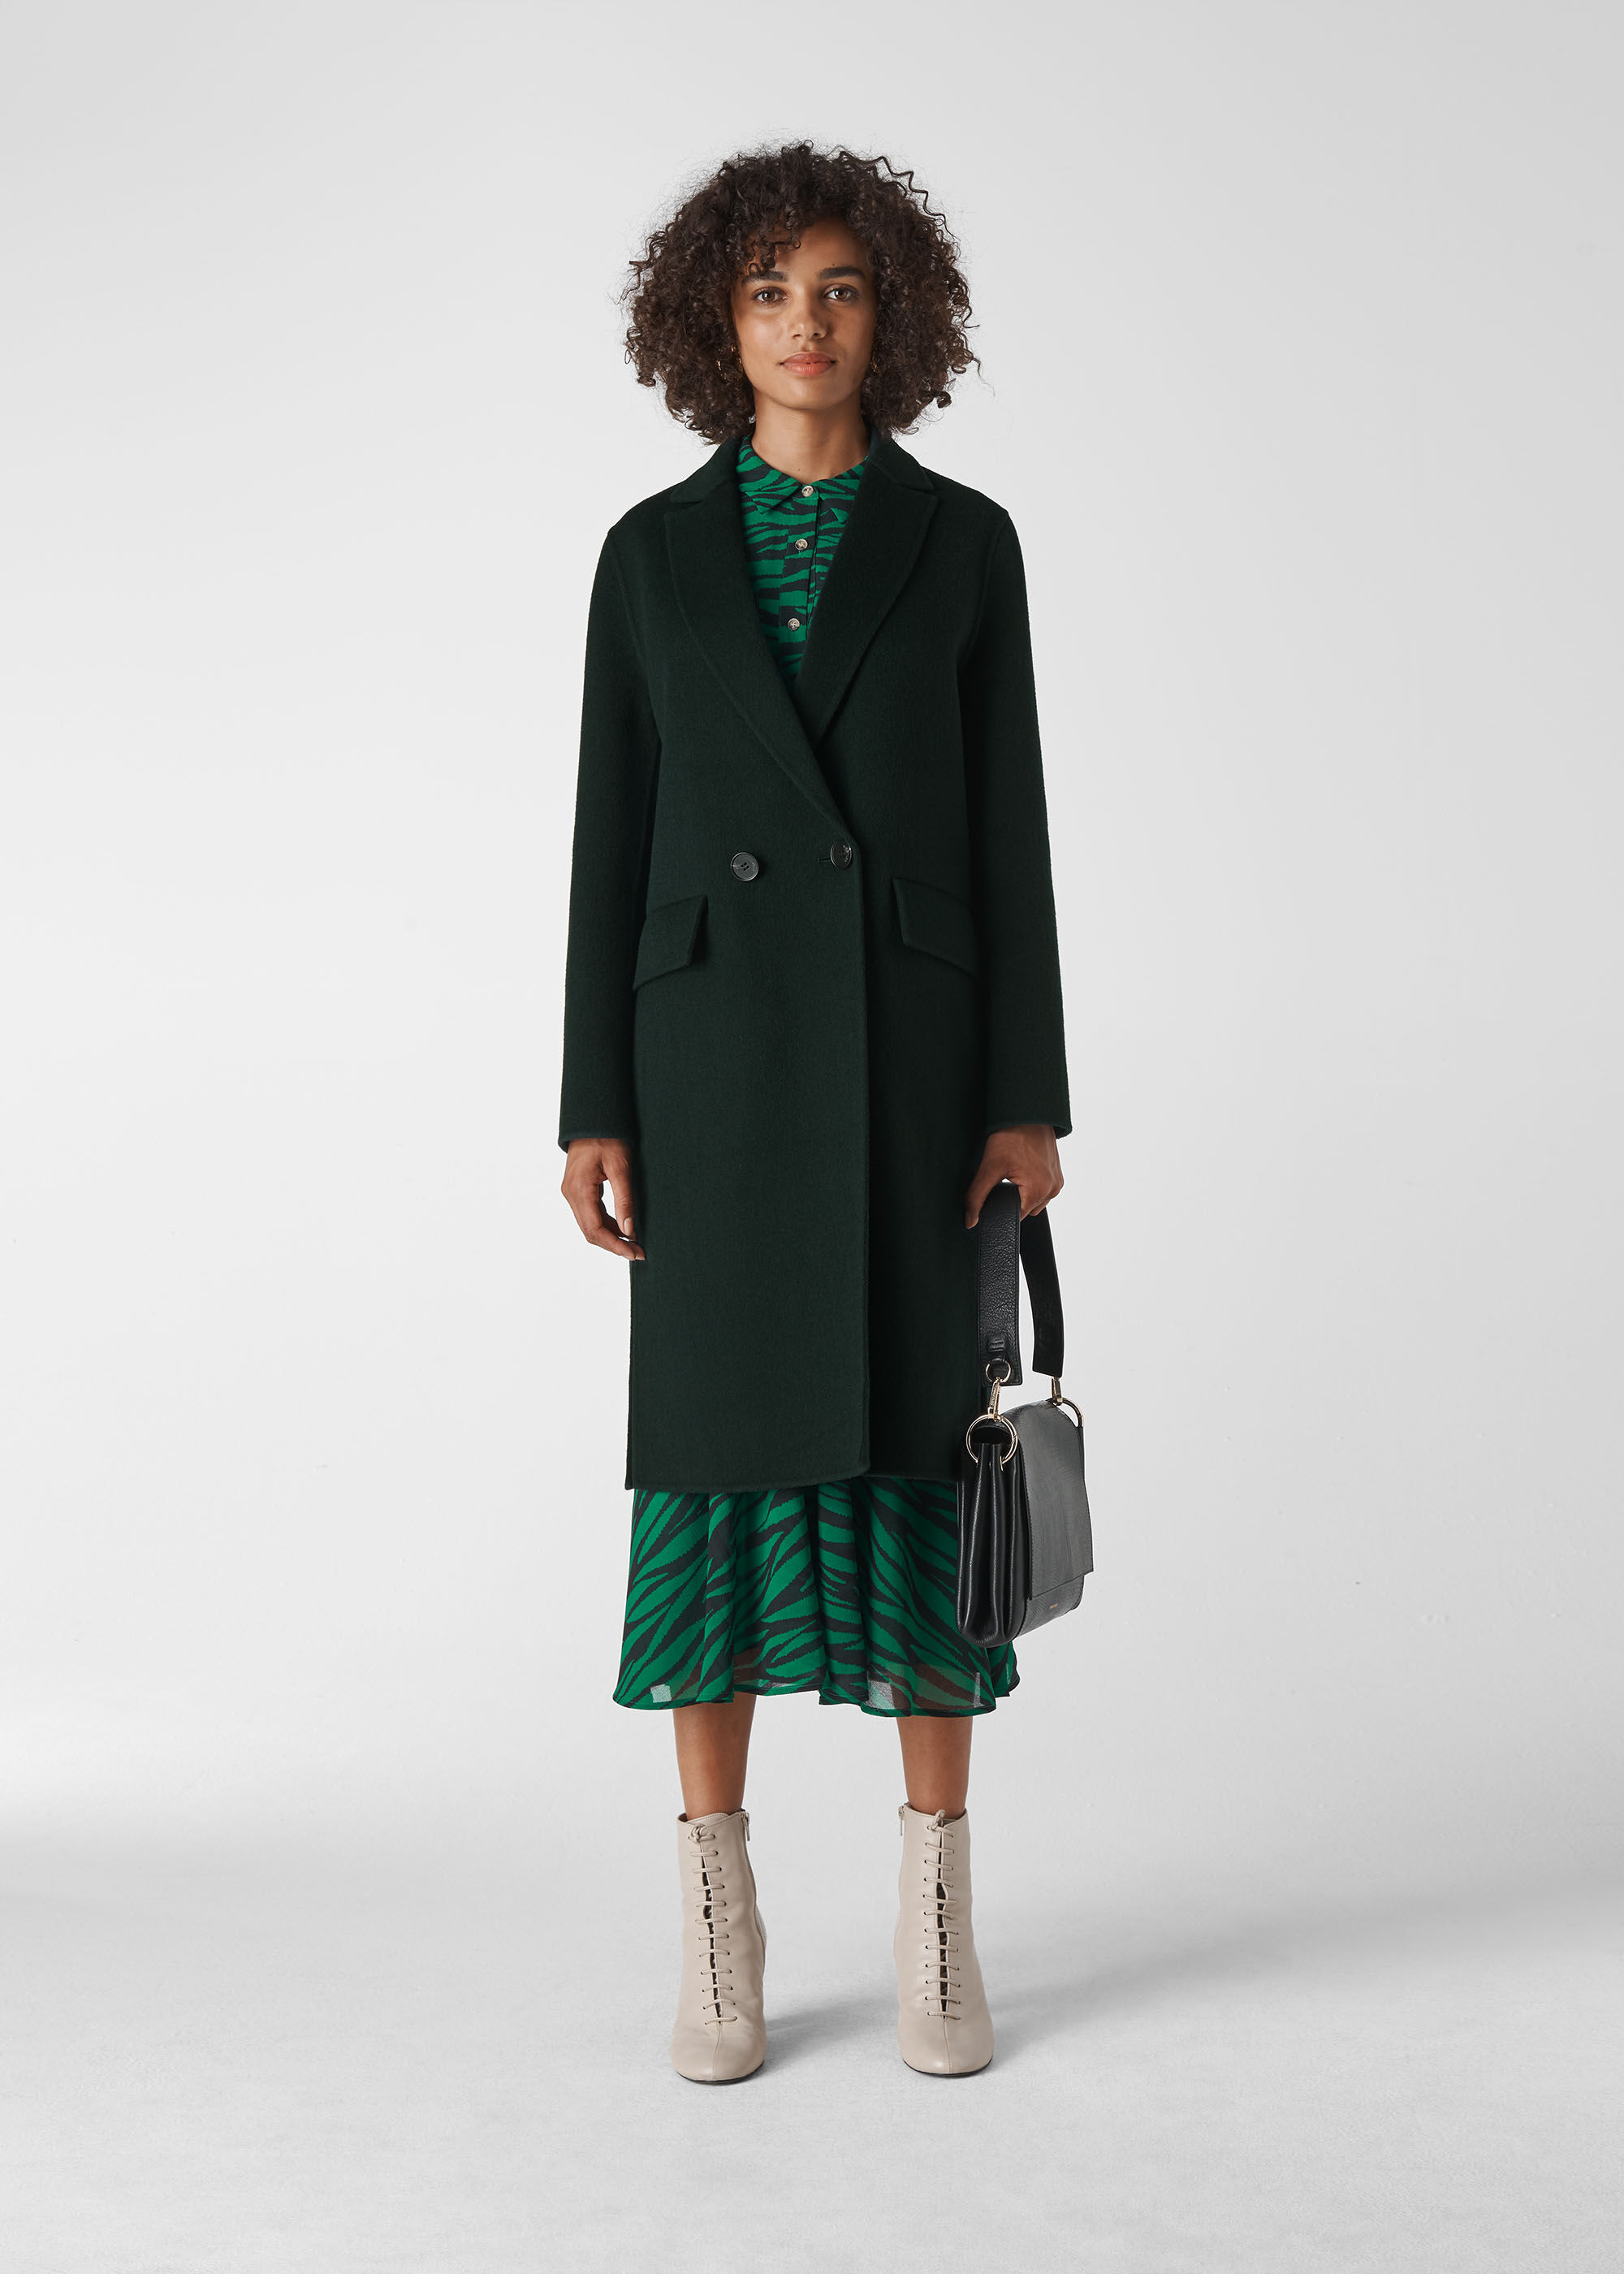 Dark Green Double Faced Wool Coat | WHISTLES |